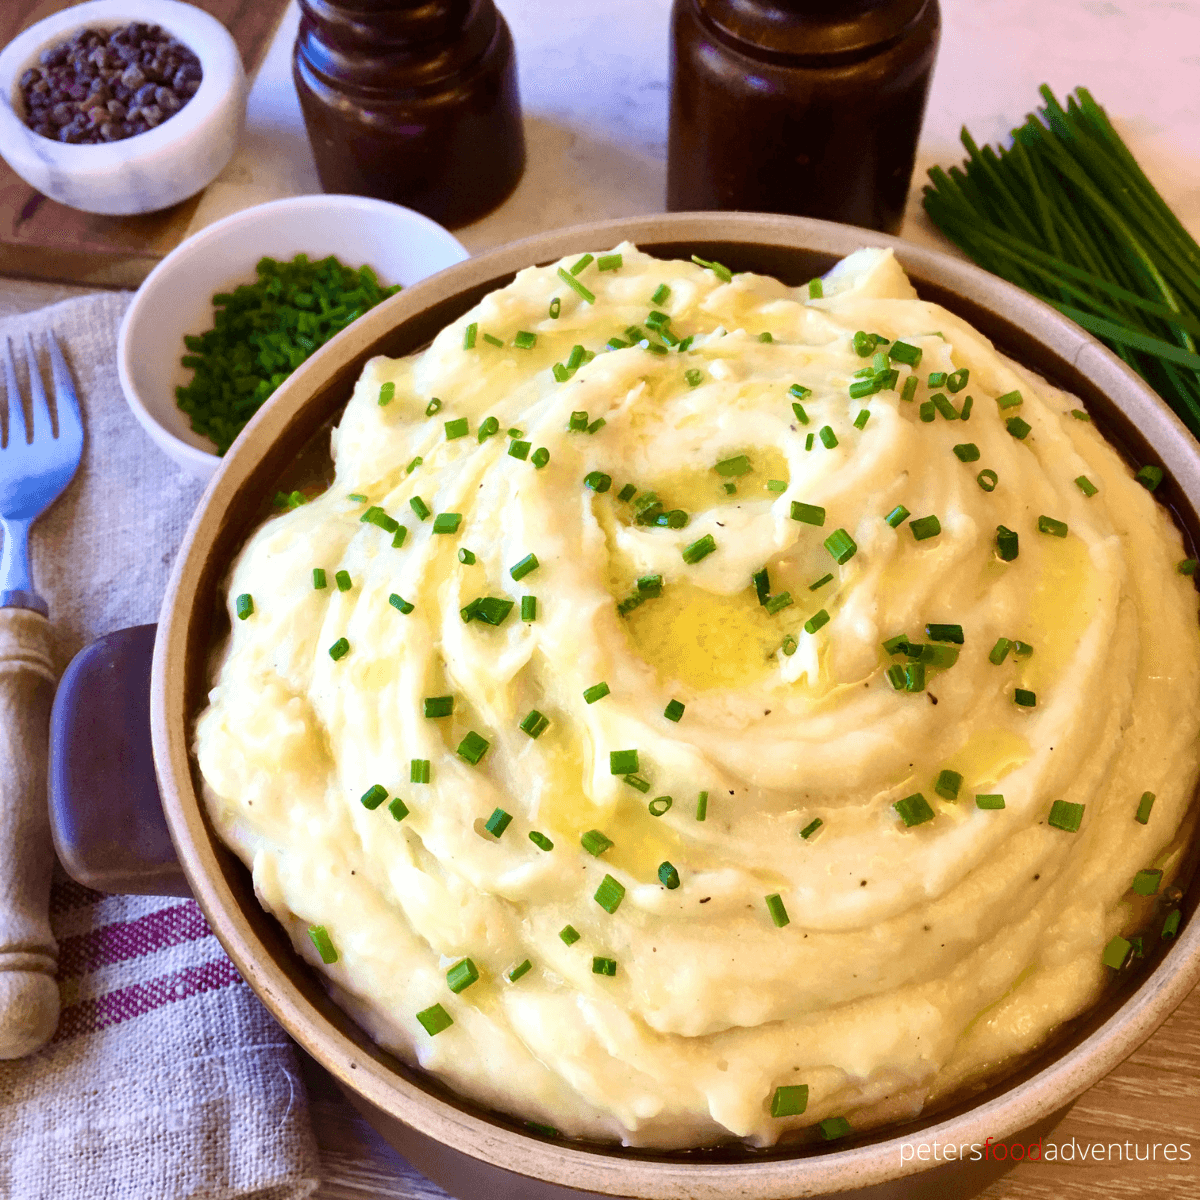 This classic, ultra creamy, rich and smooth Garlic Mashed Potato recipe is so delicious. Absolutely a family favorite dinner side, perfect for your holidays, Thanksgiving for Christmas or everyday! Easy recipe that can be made in advance!